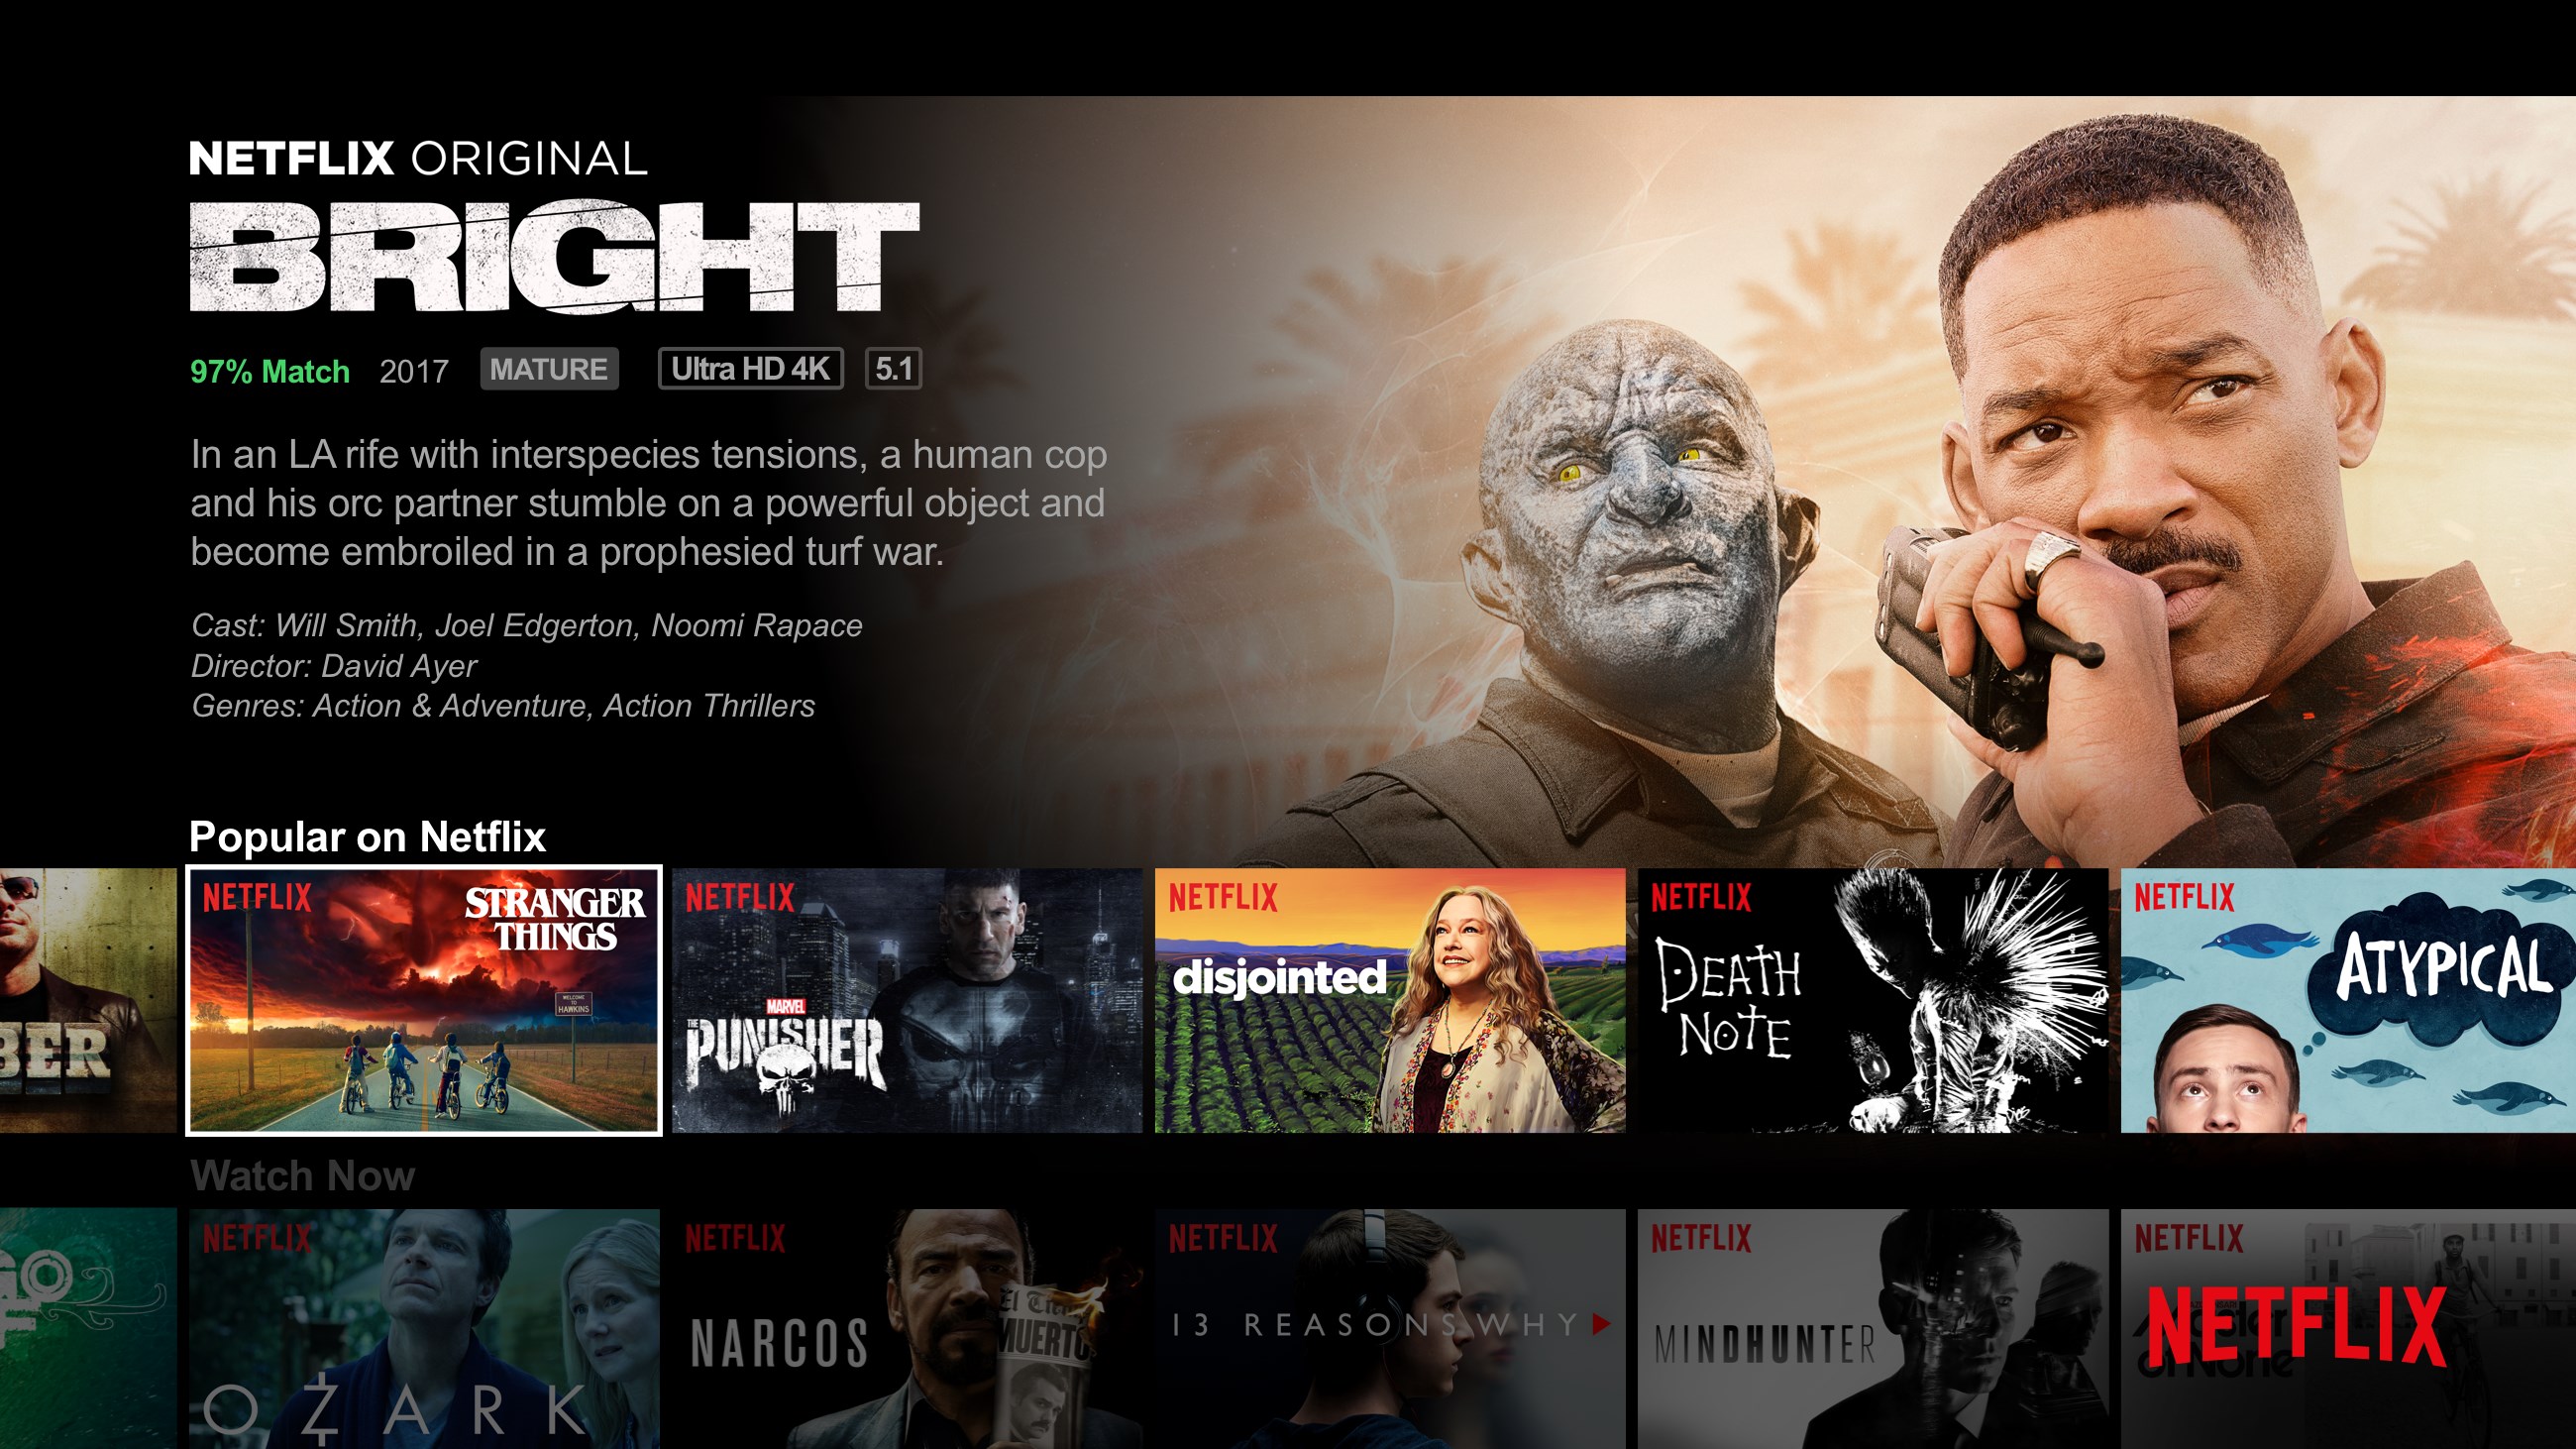 Netflix for Windows 10 free download on 10 App Store